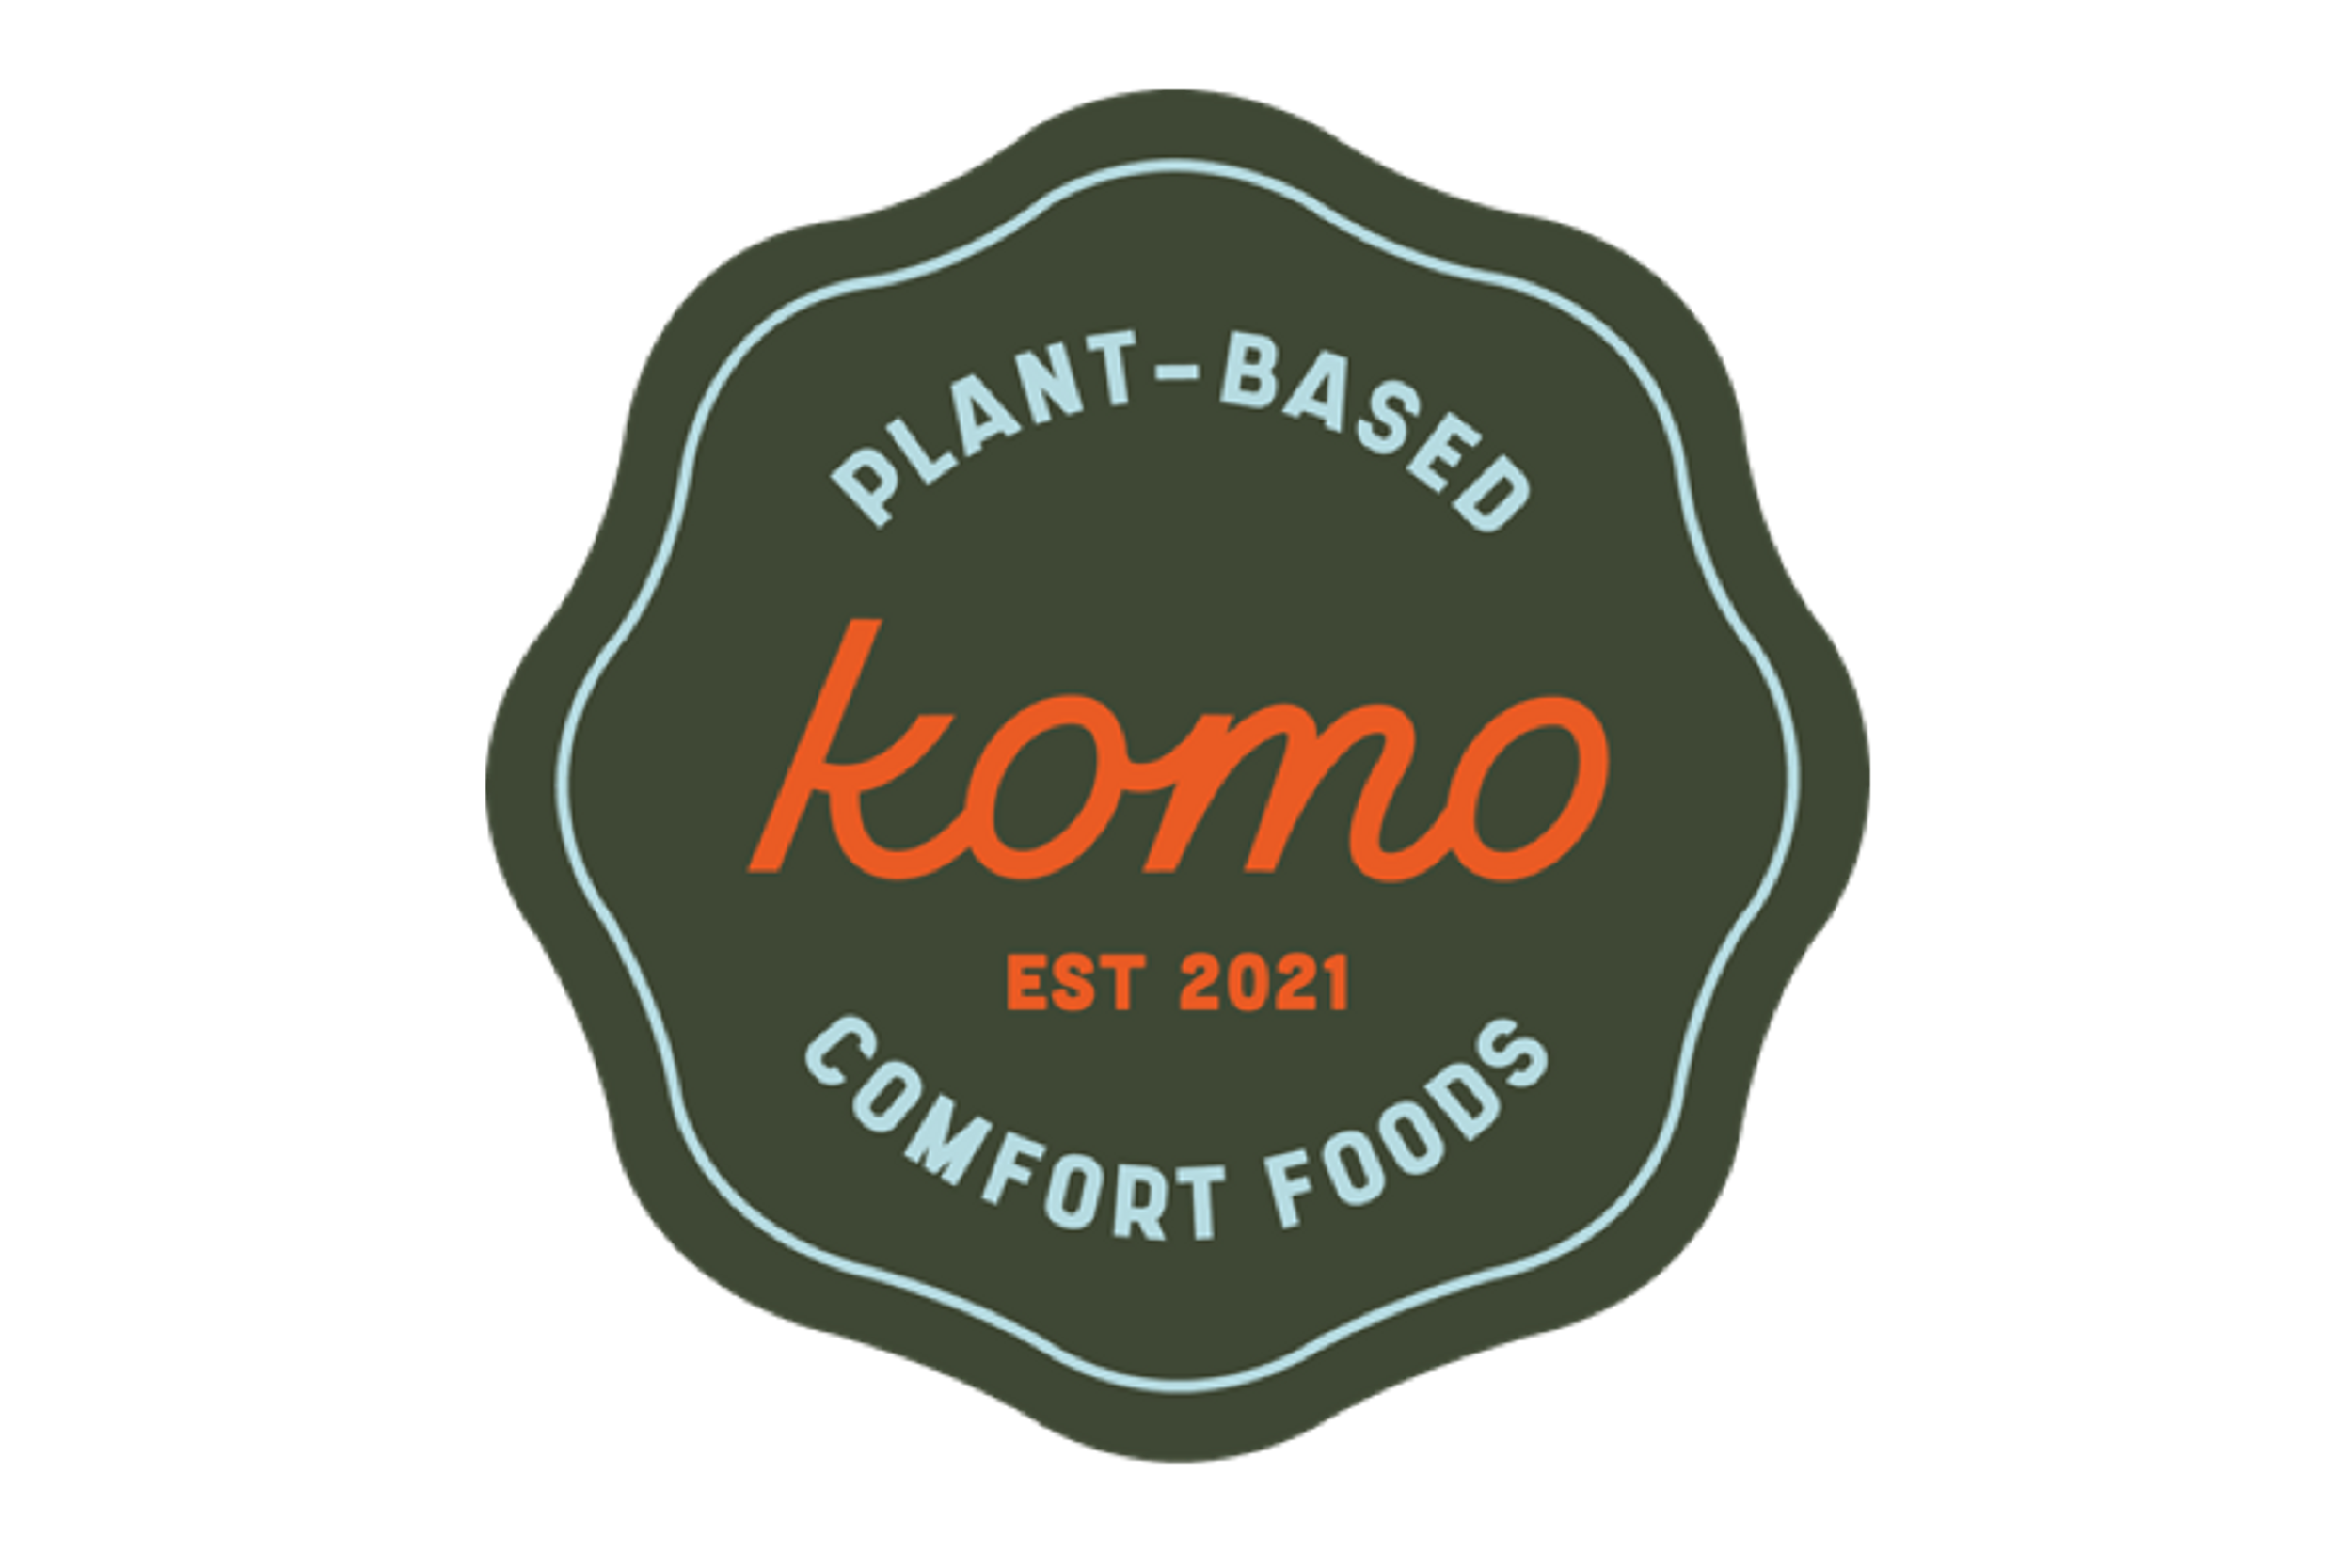 Komo Plant Based Foods Launches in Whole Foods Market Retail Locations in Western Canada